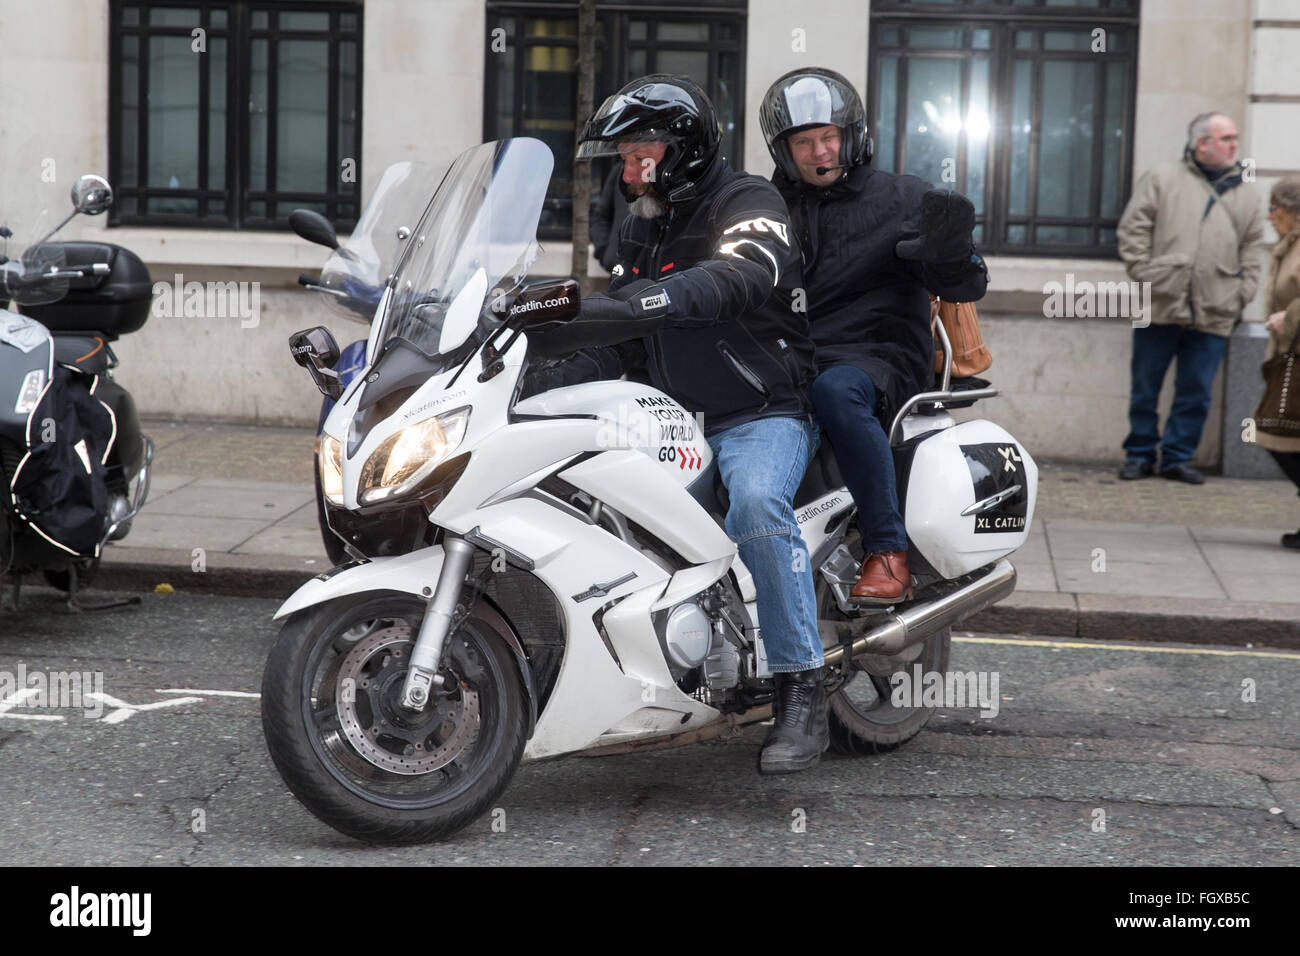 Dermot O'Leary pictured leaving the Radio 2 studio on a motorbike  Featuring: Dermot O'Leary Where: London, United Kingdom When: 18 Jan 2016  Stock Photo - Alamy